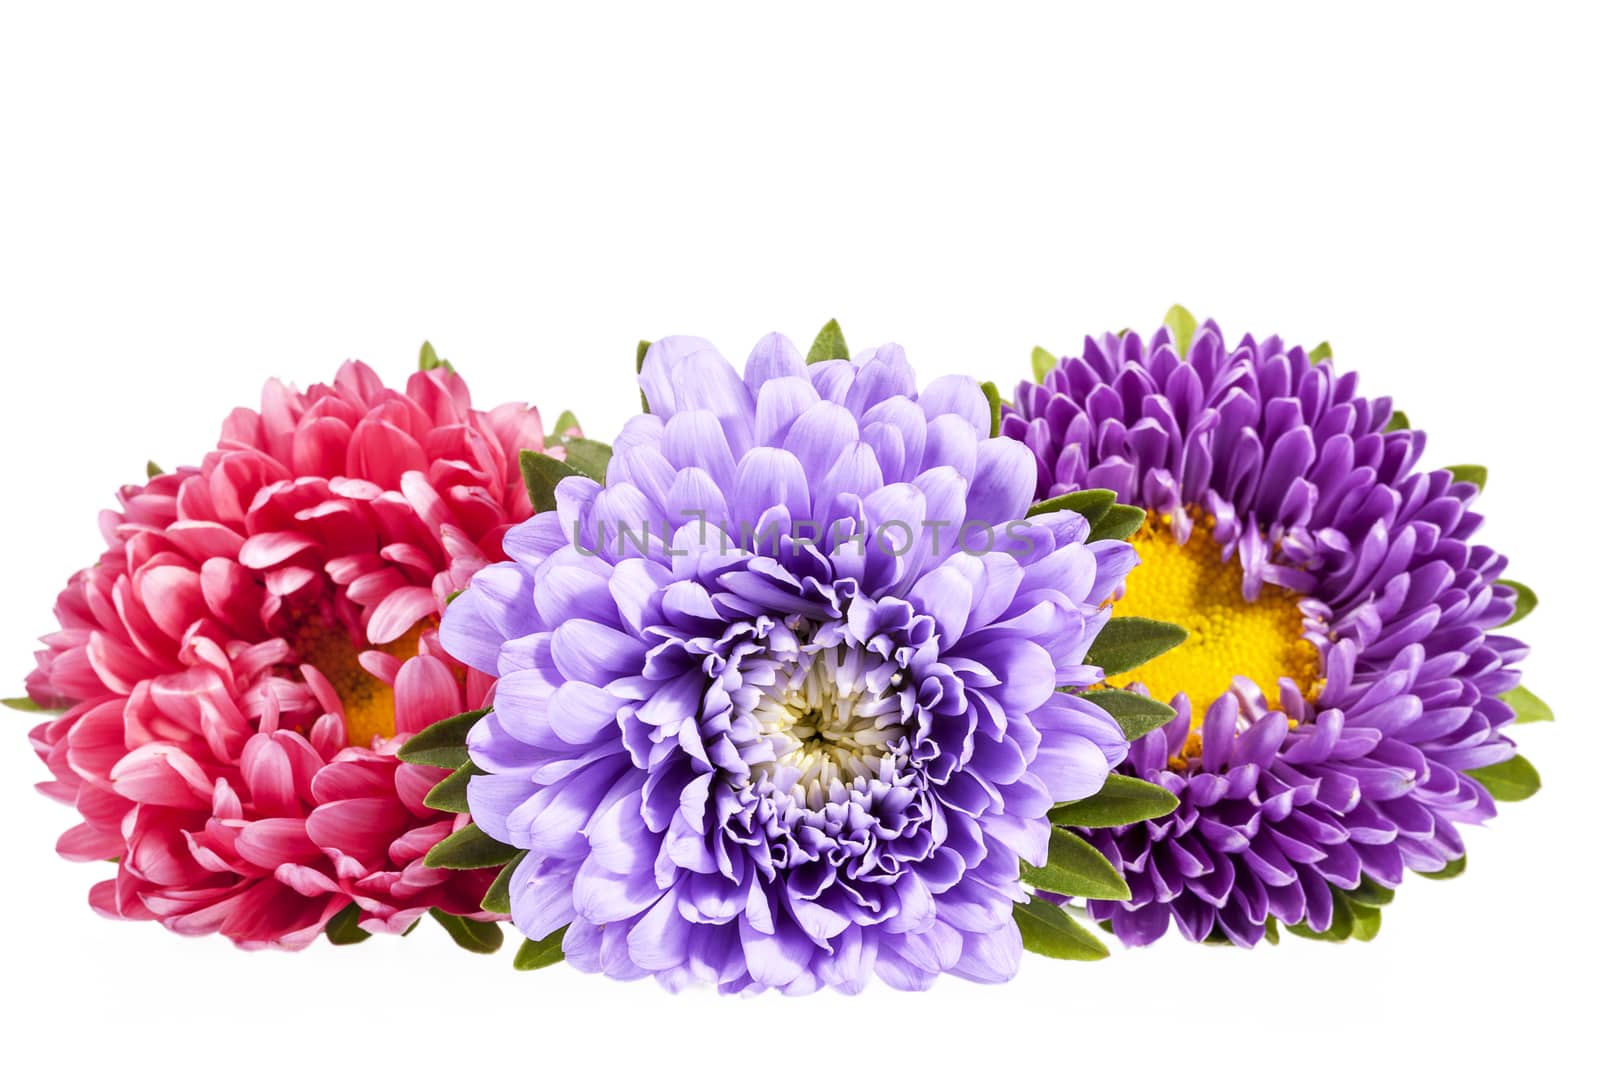 Aster flowers isolated on white background .